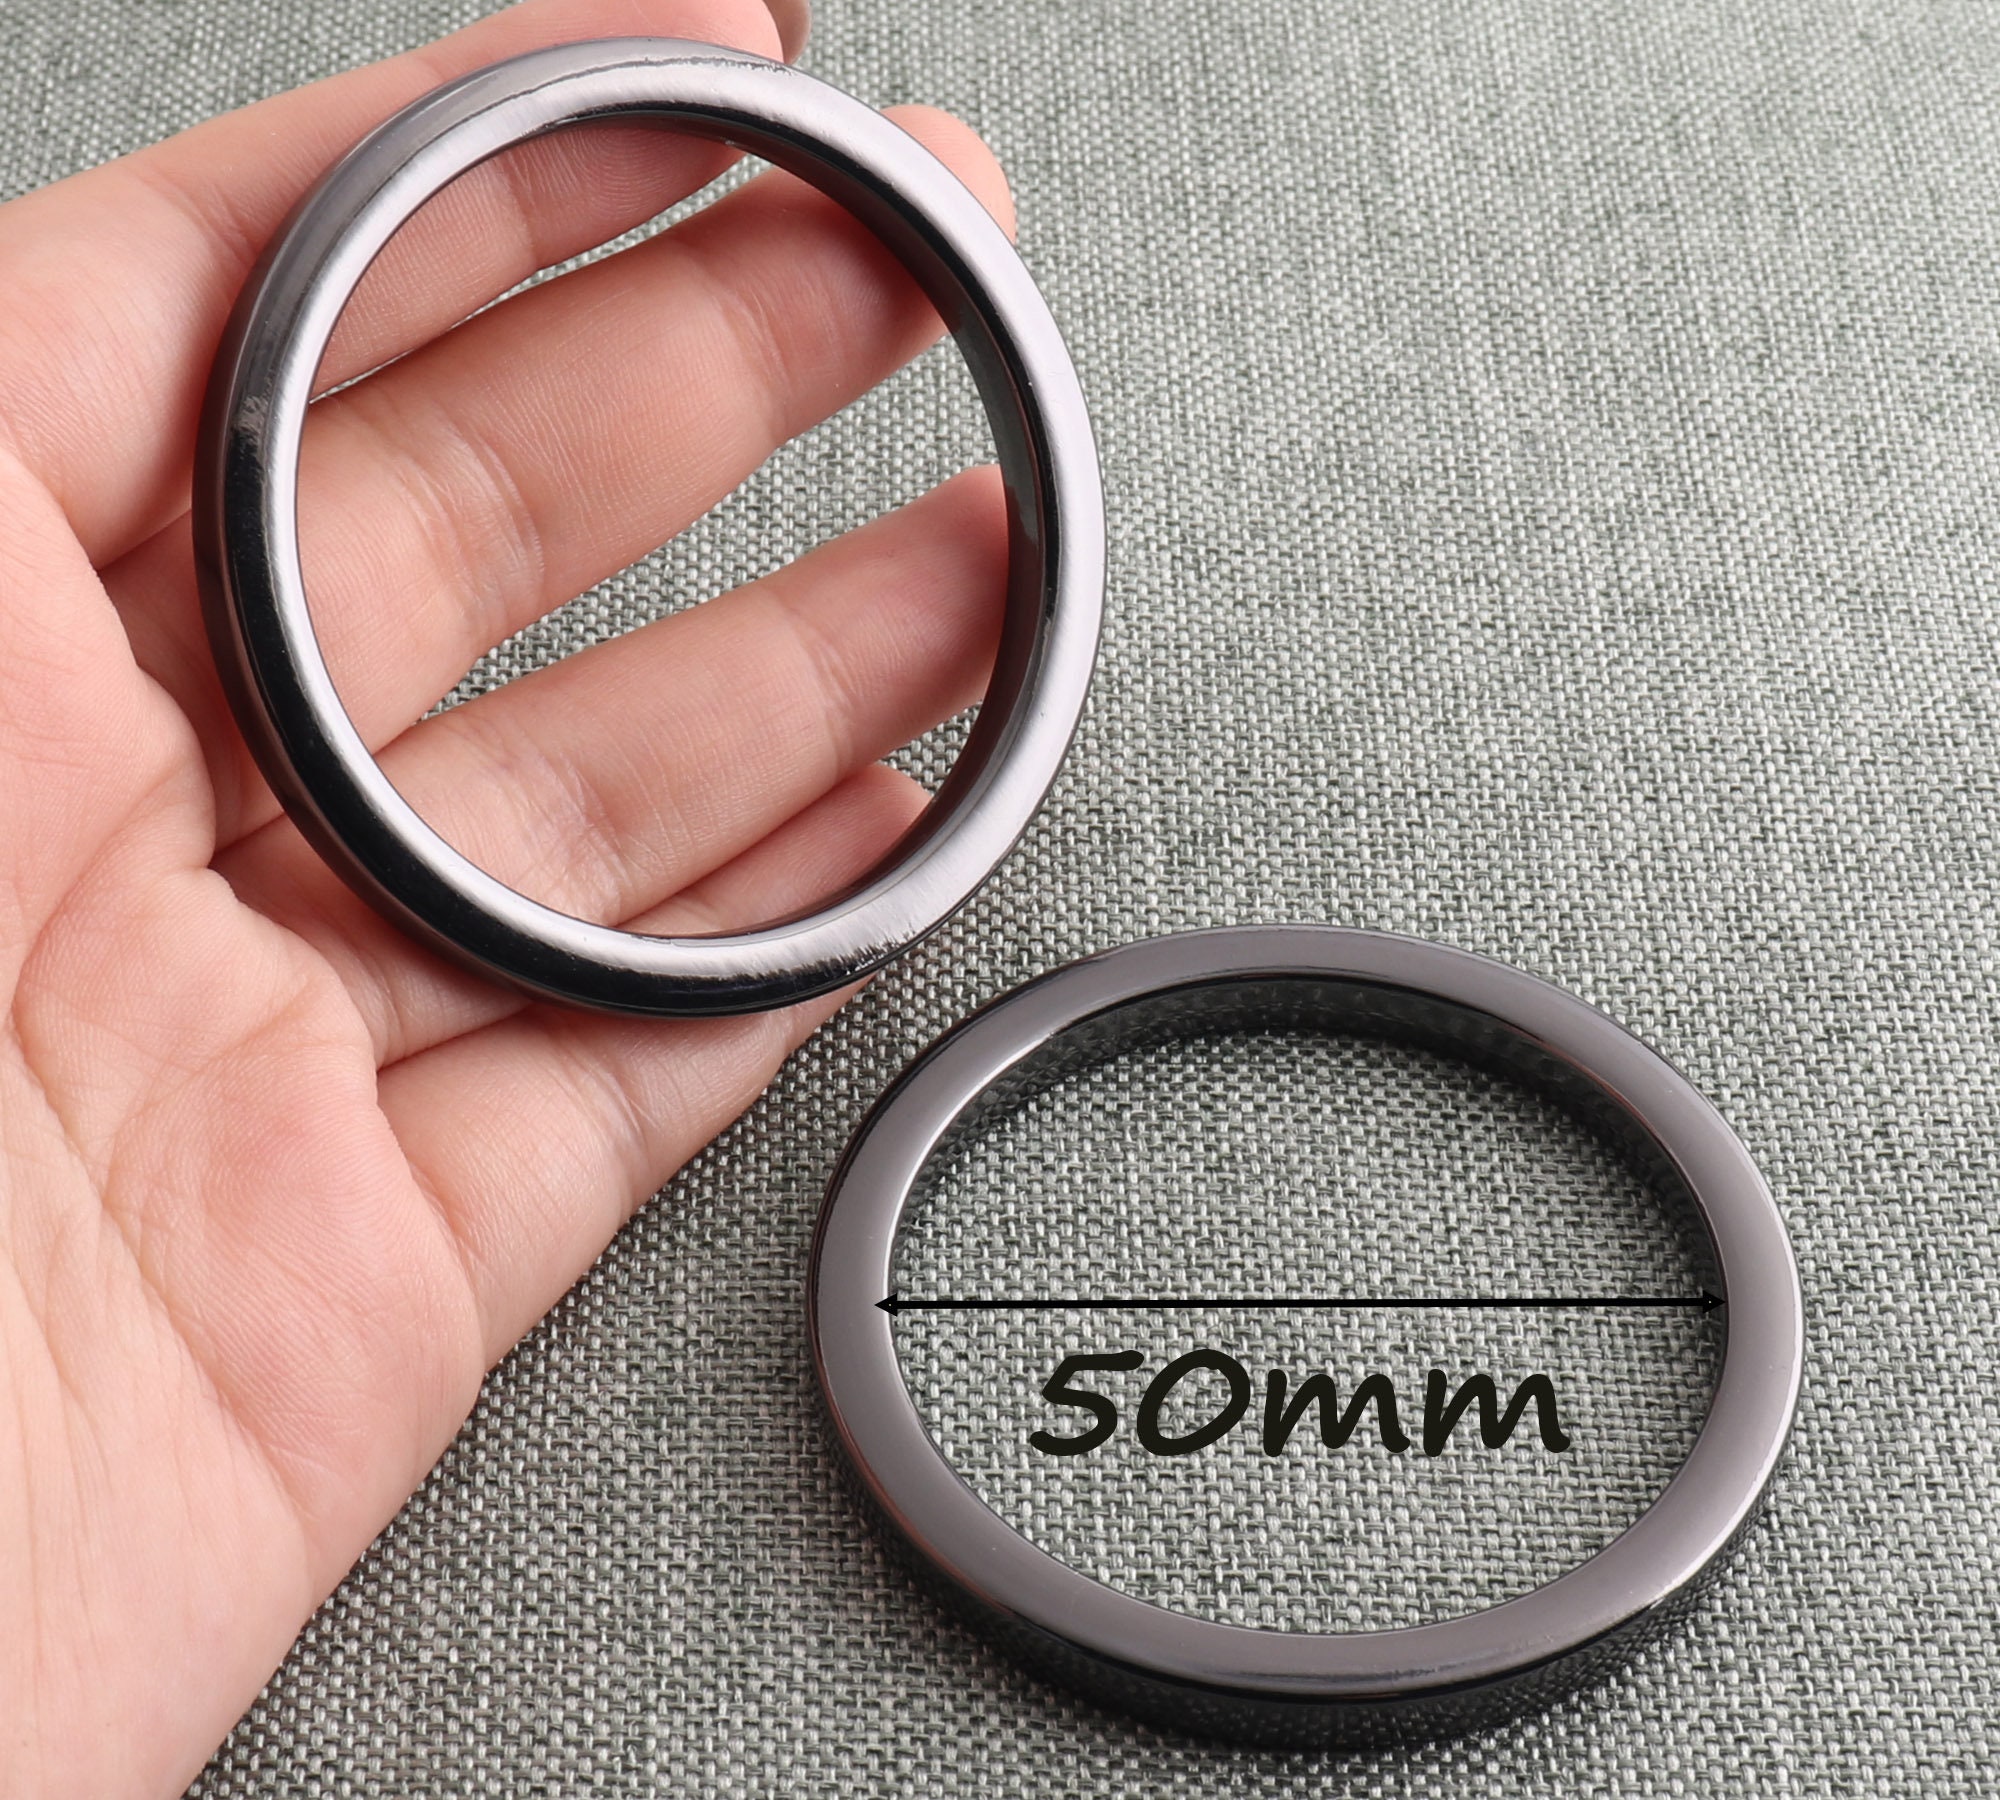 Metal O Rings, 15 Pack 20mm(0.79 inch) ID 2mm Thickness Multi-Purpose Non Welded O-Ring Buckle, Silver Tone, Size: Small